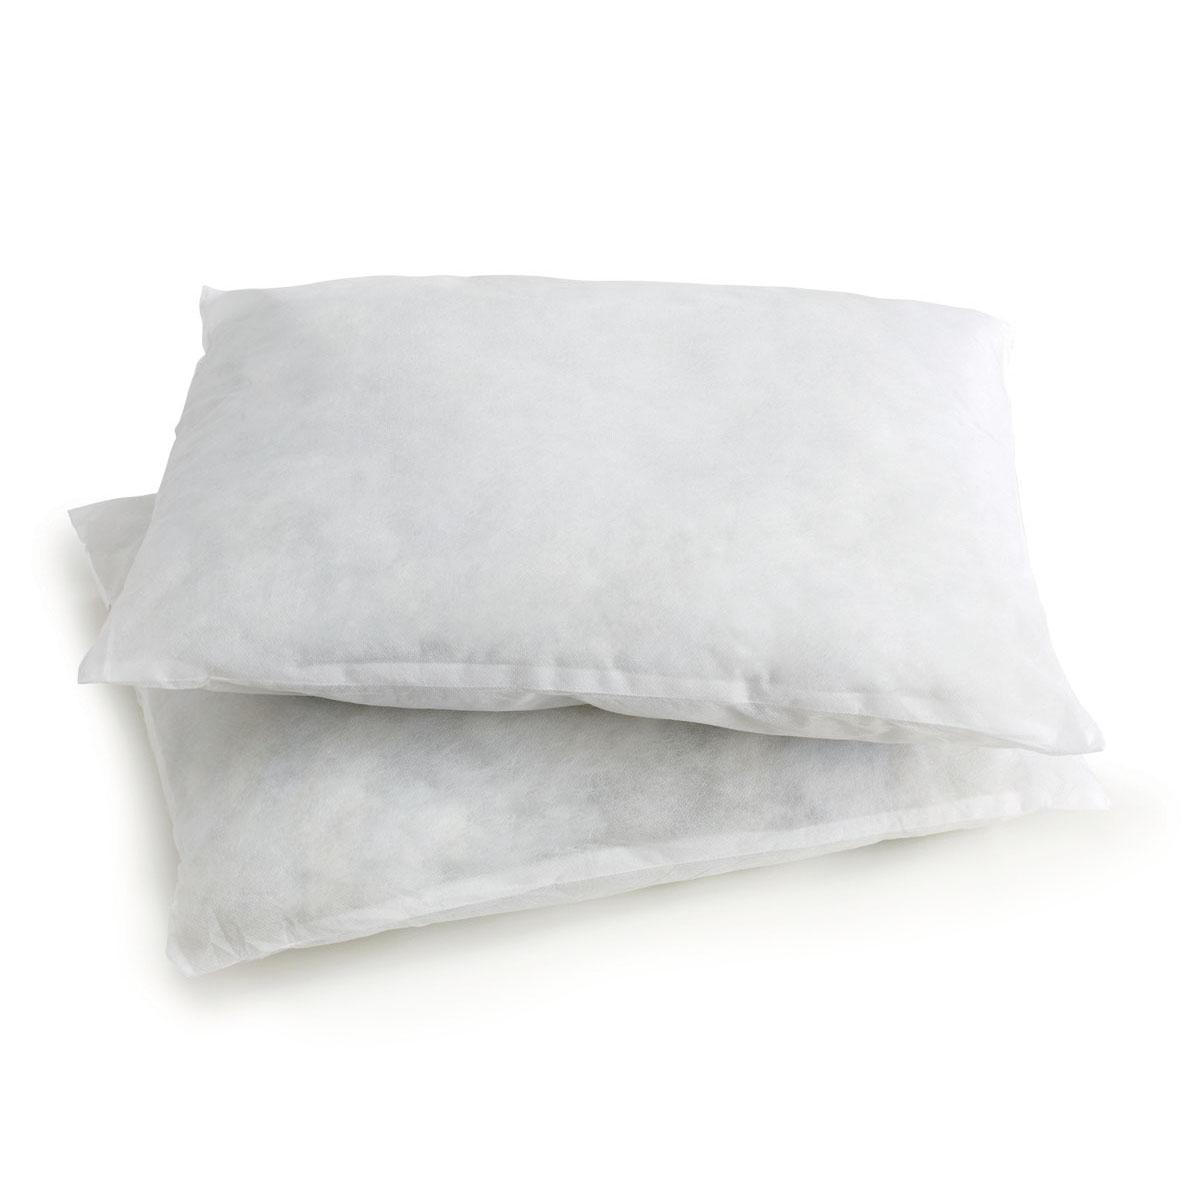 ComfortMed Disposable Pillows,White Case of 12